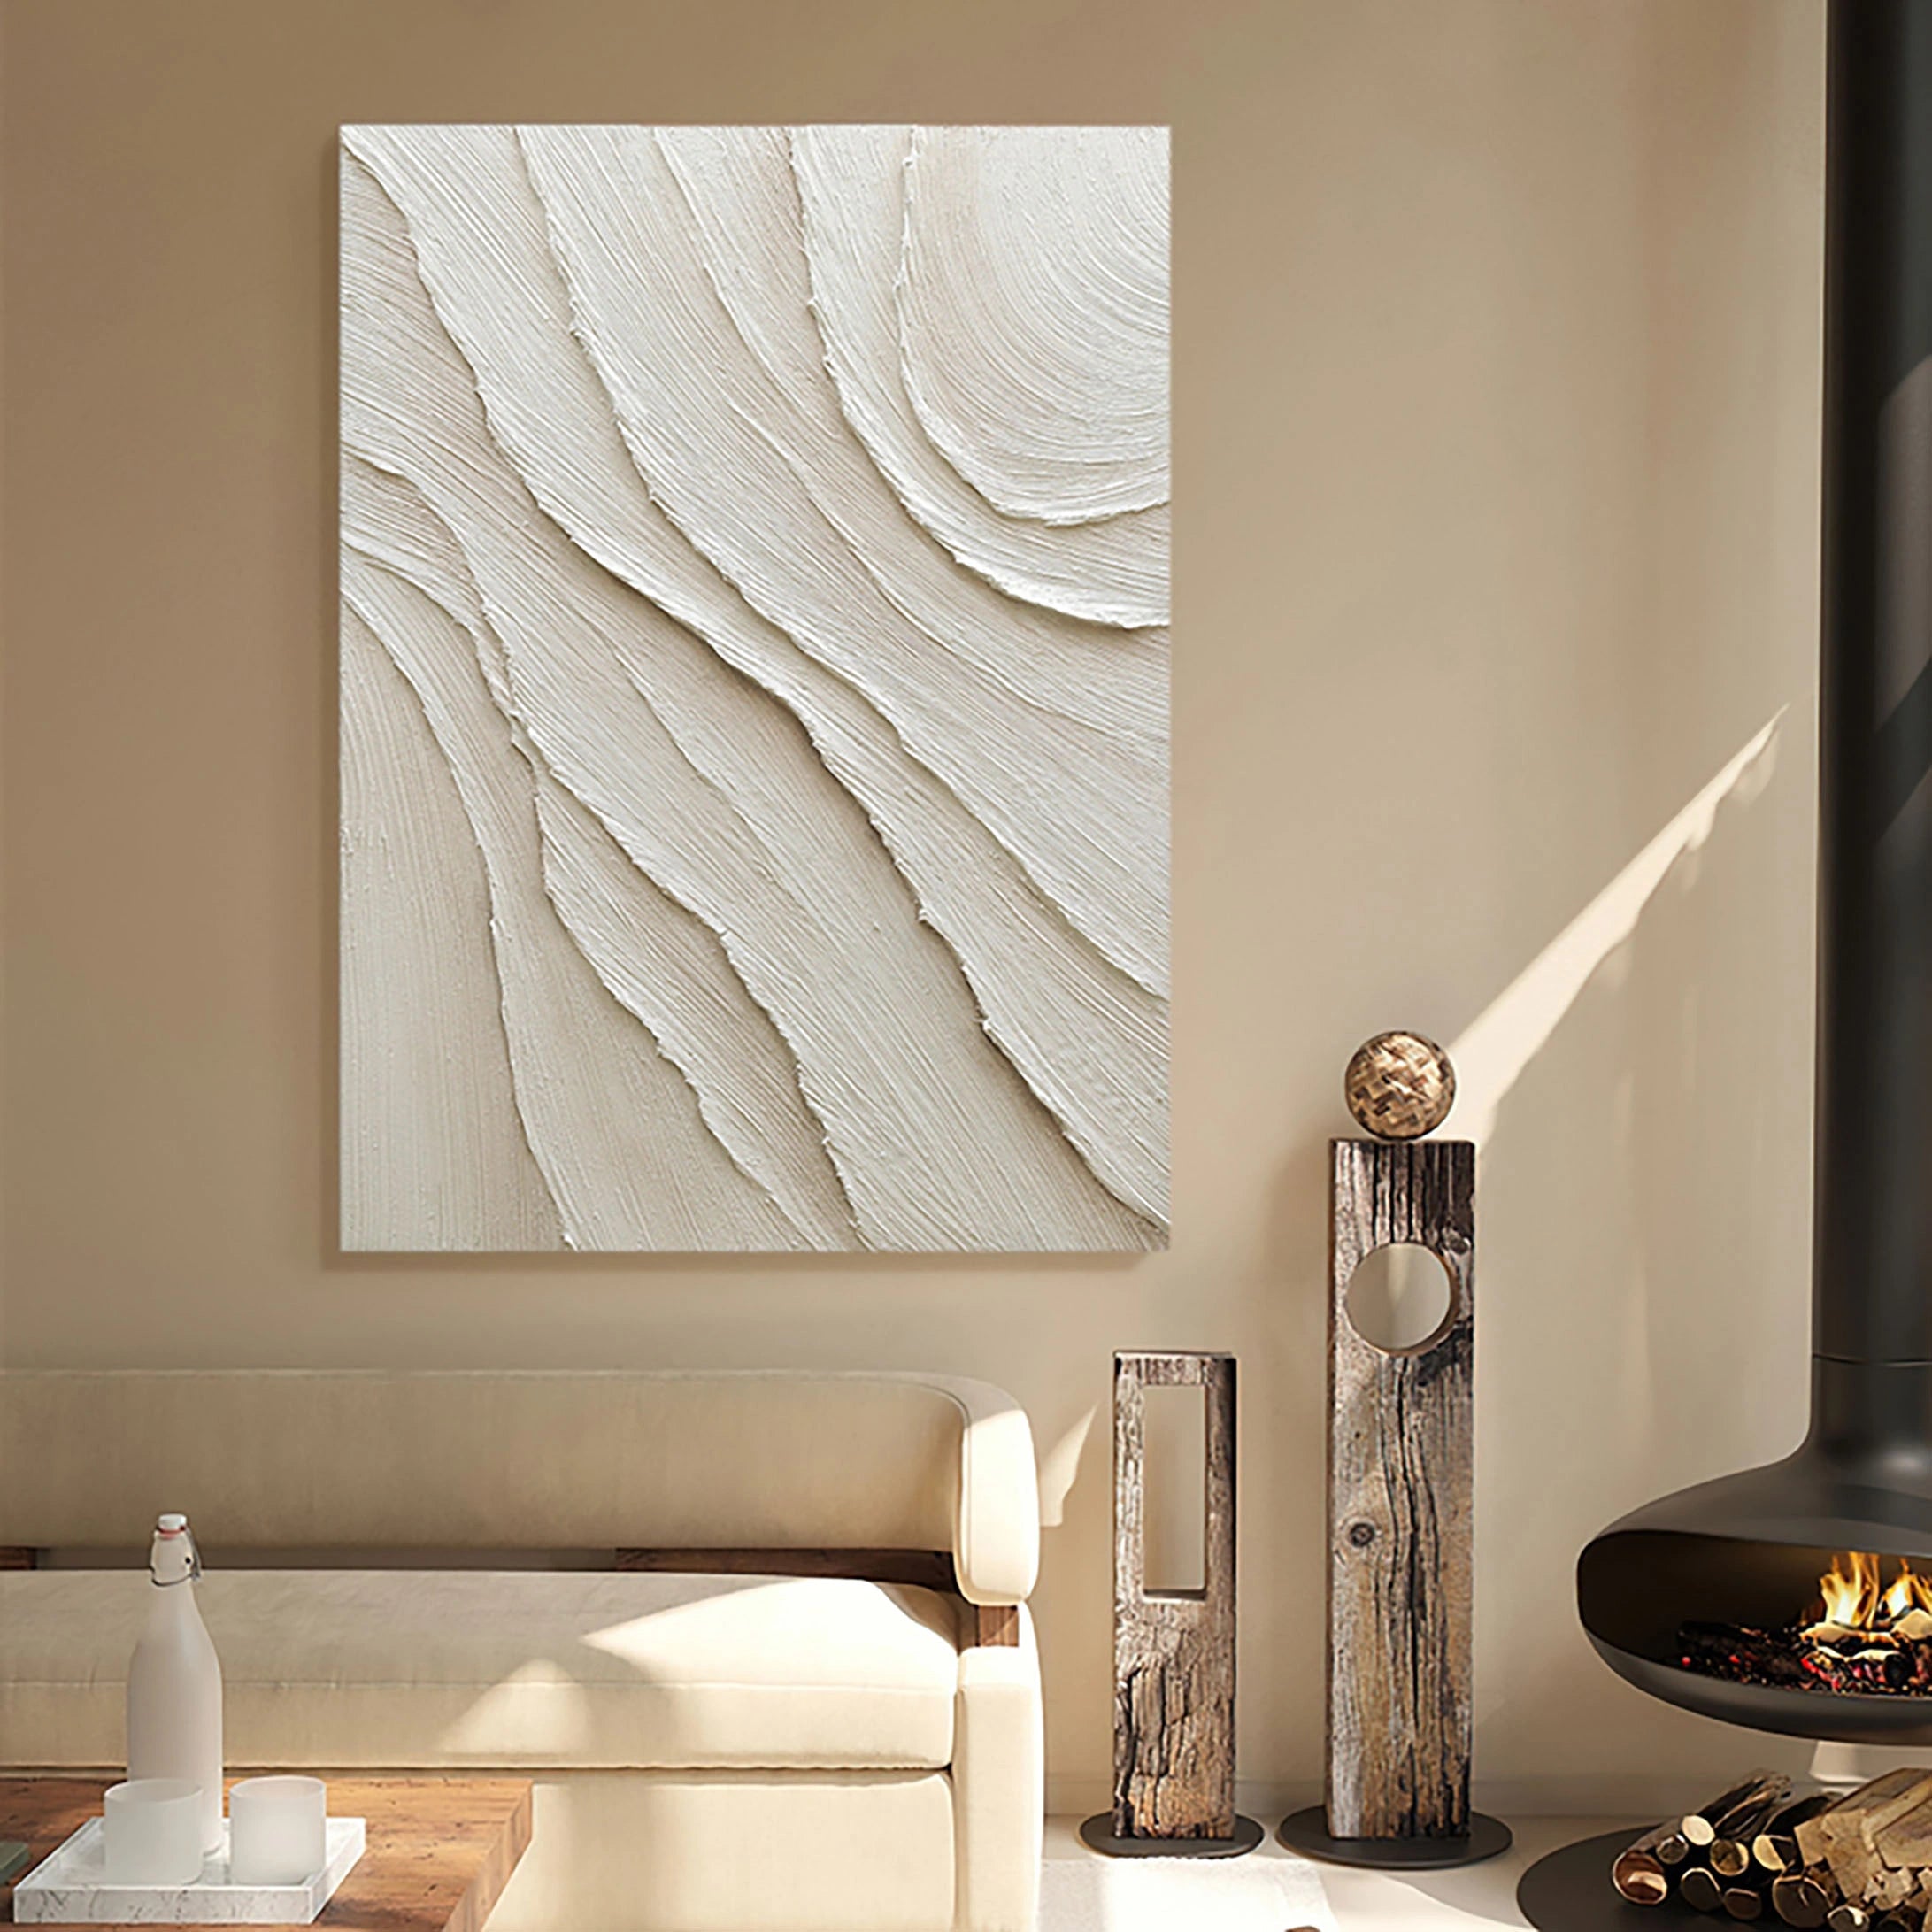 Plaster Art Painting 3D Textured Large Canvas for Living Room/Bedroom